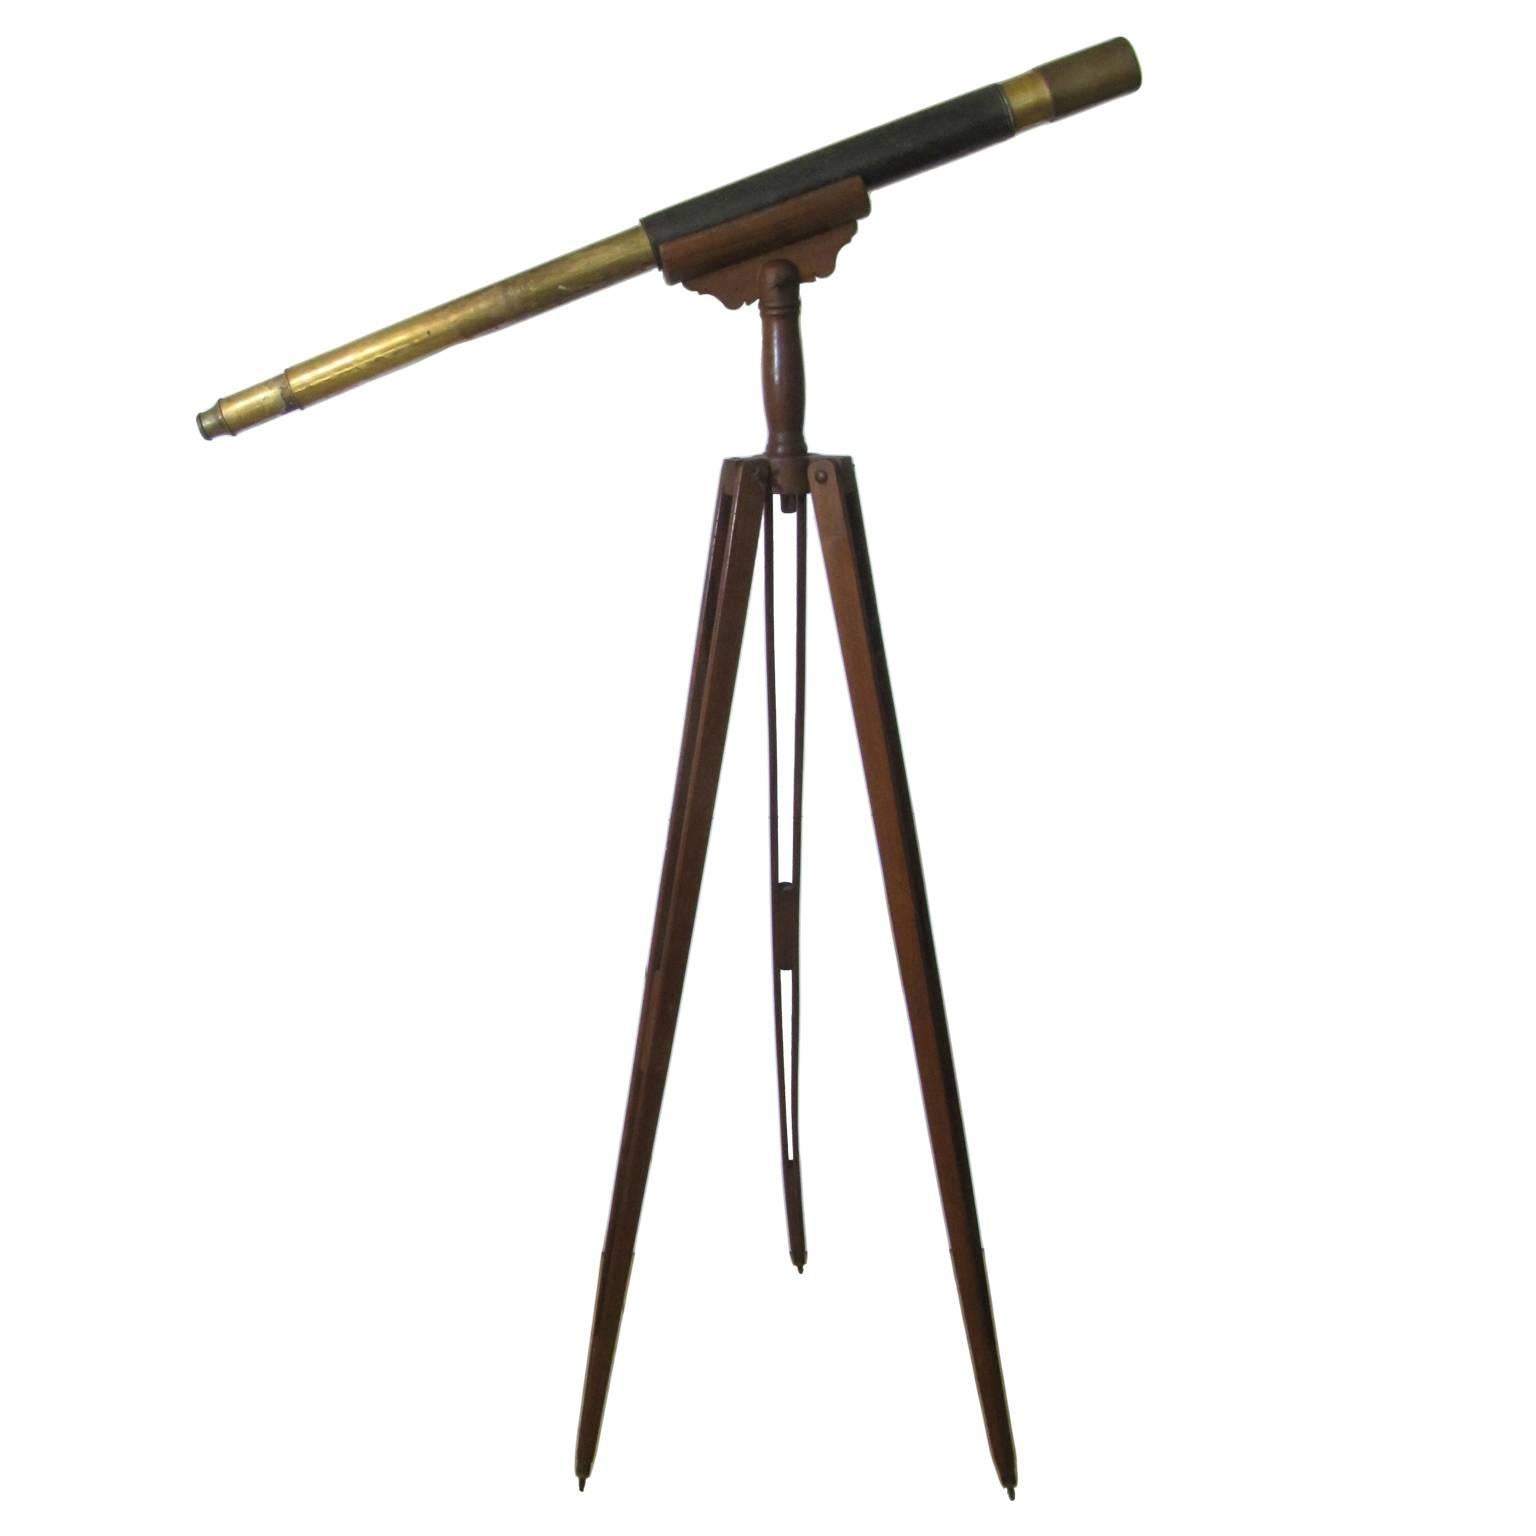 English 19th Century Astronomical Telescope in Brass on Wooden Tripod 1